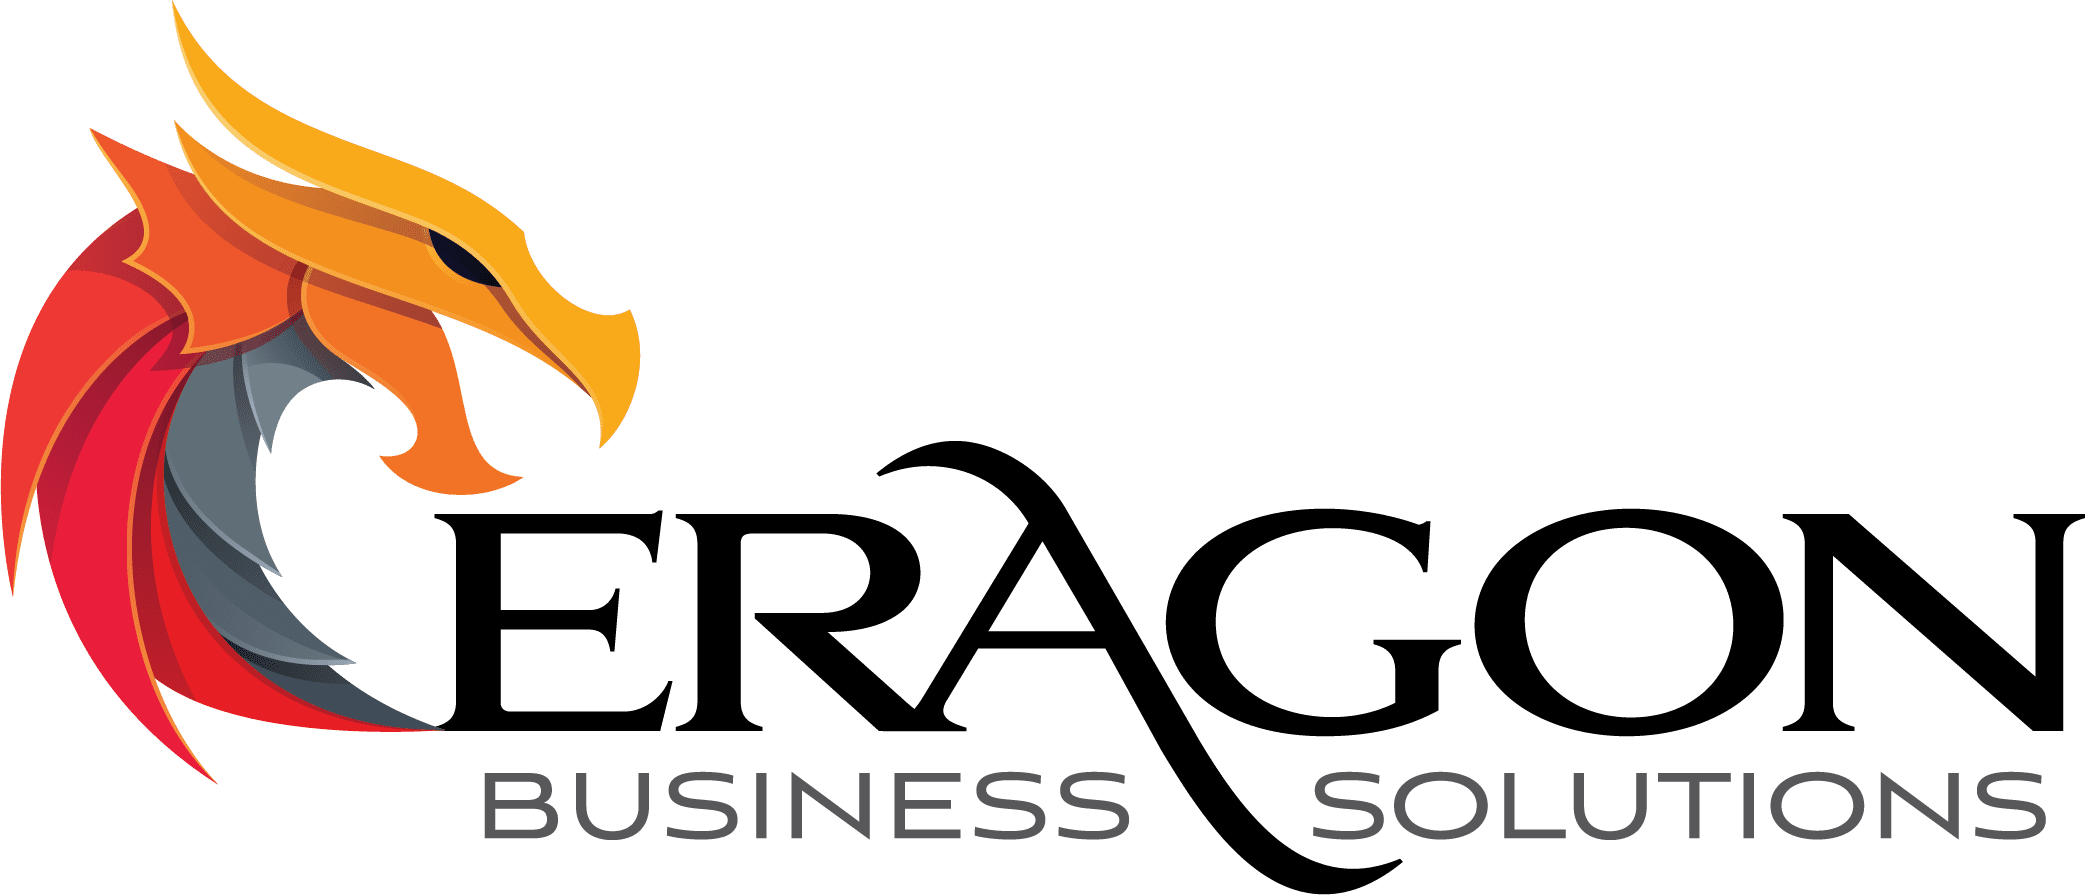 Eragon Business Solutions - Accounting Services